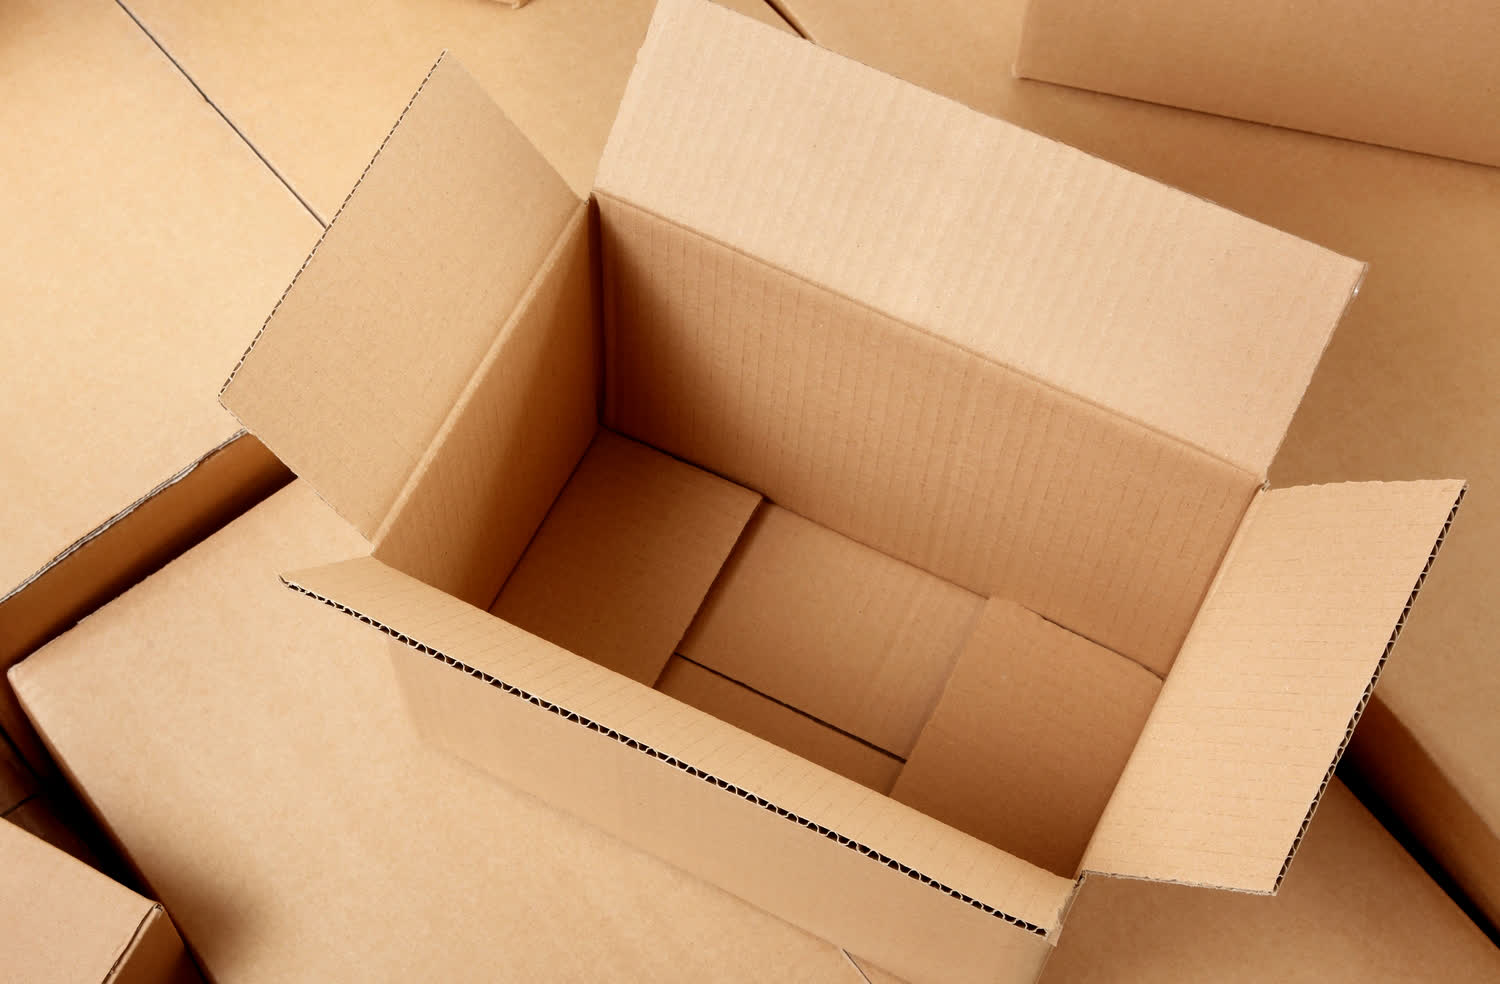 Cardboard shortages put additional stress on the supply chain heading into the holidays